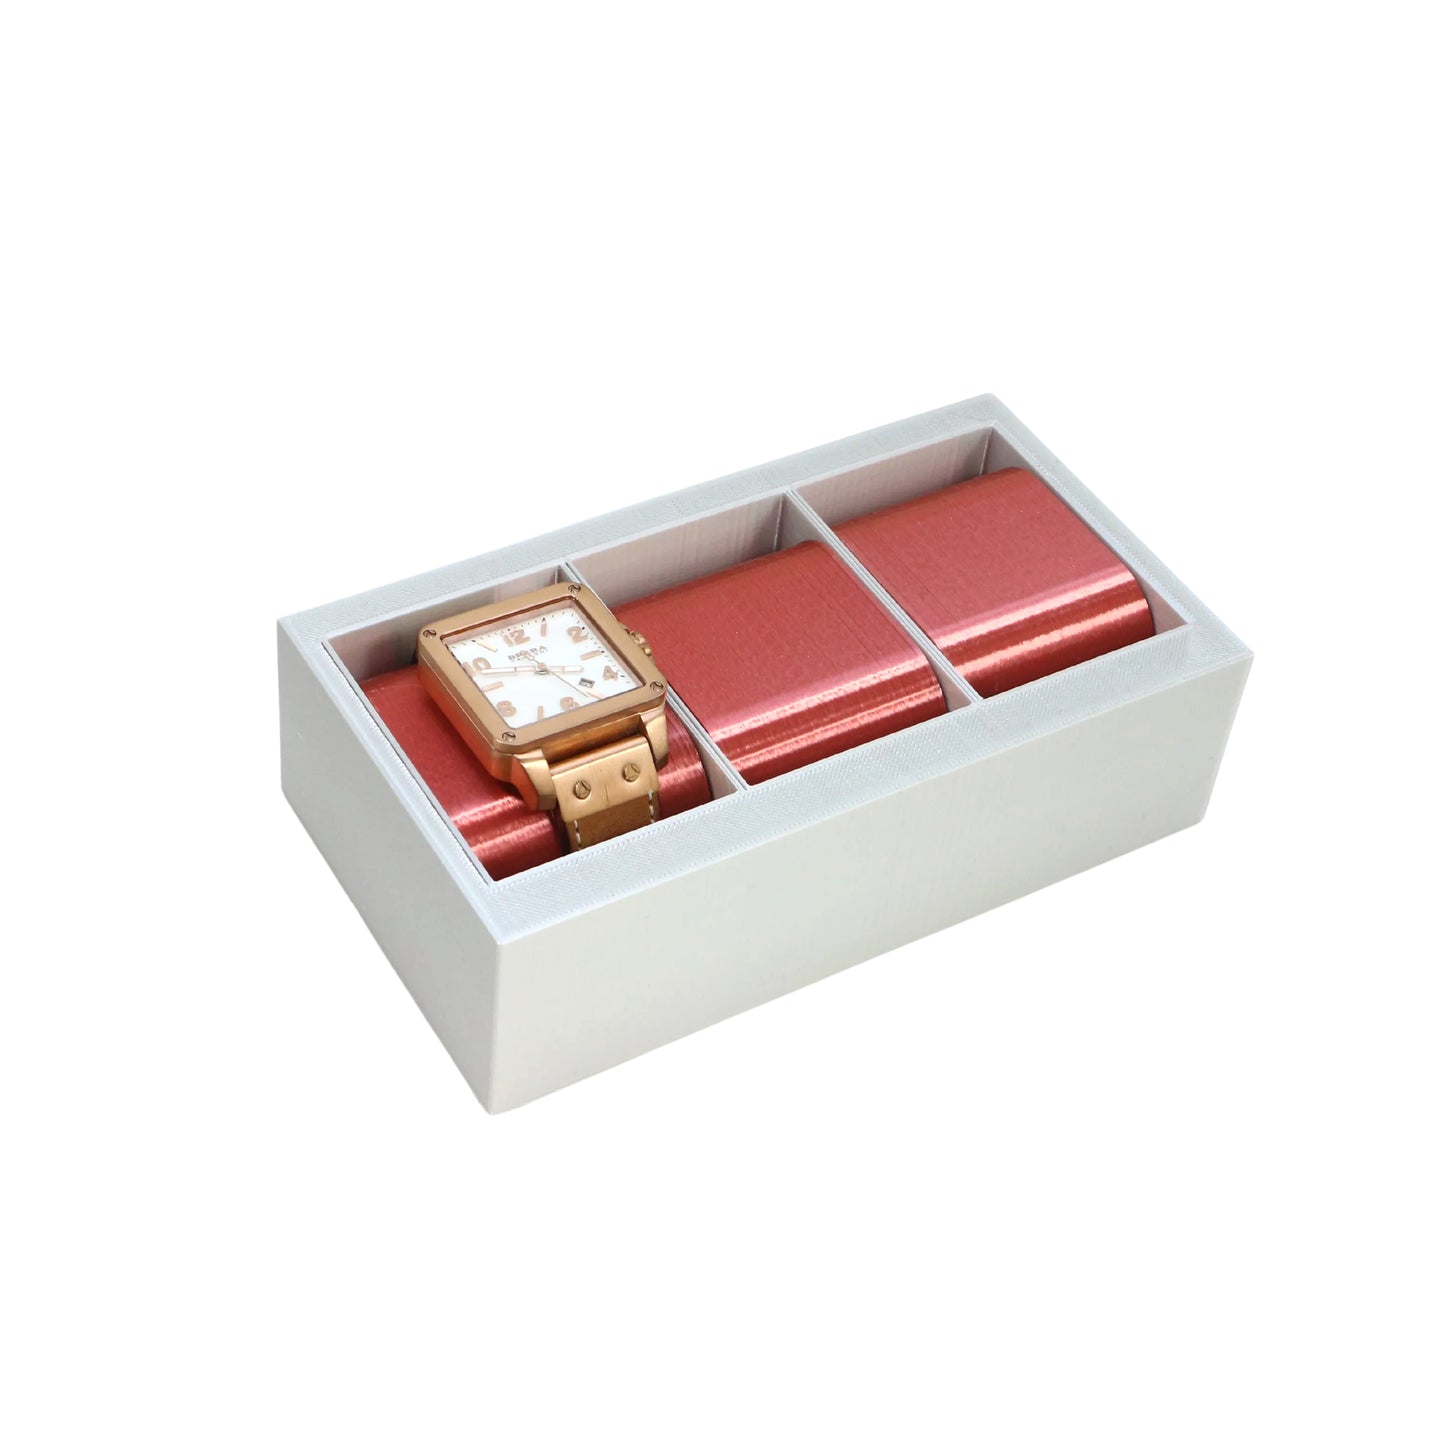 Imperiale watch box